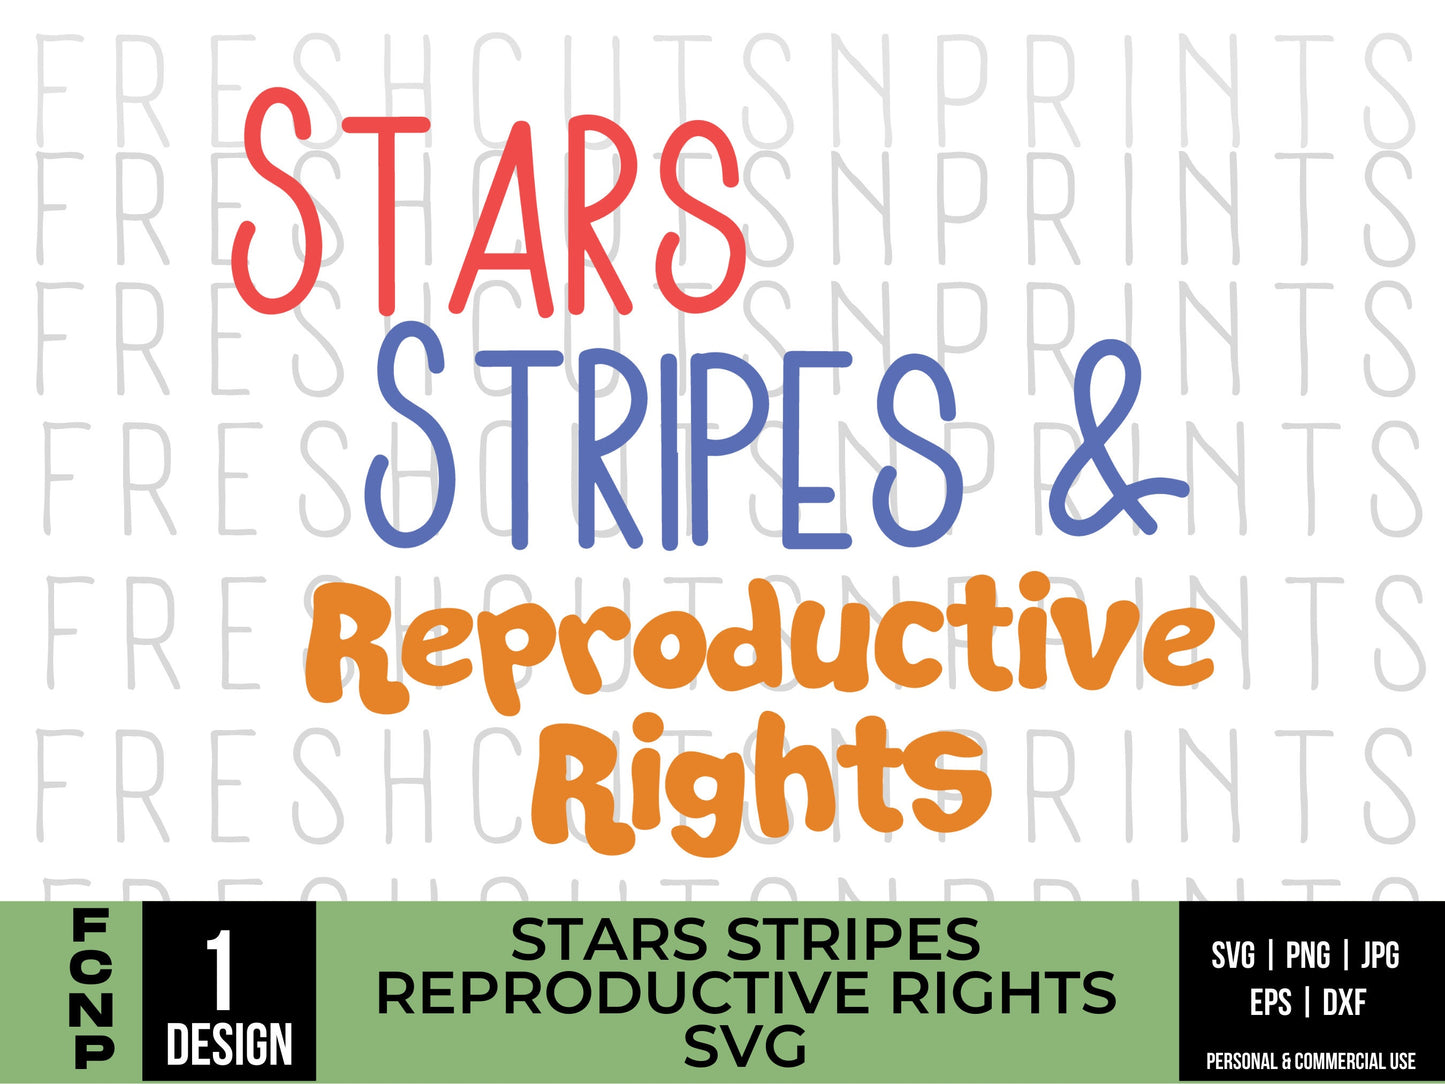 Stars Stripes and Reproductive Rights svg, Pro Choice svg, Feminist svg, Pro Roe svg, Save Roe svg, Womens Rights svg, Abortion svg, Cricut